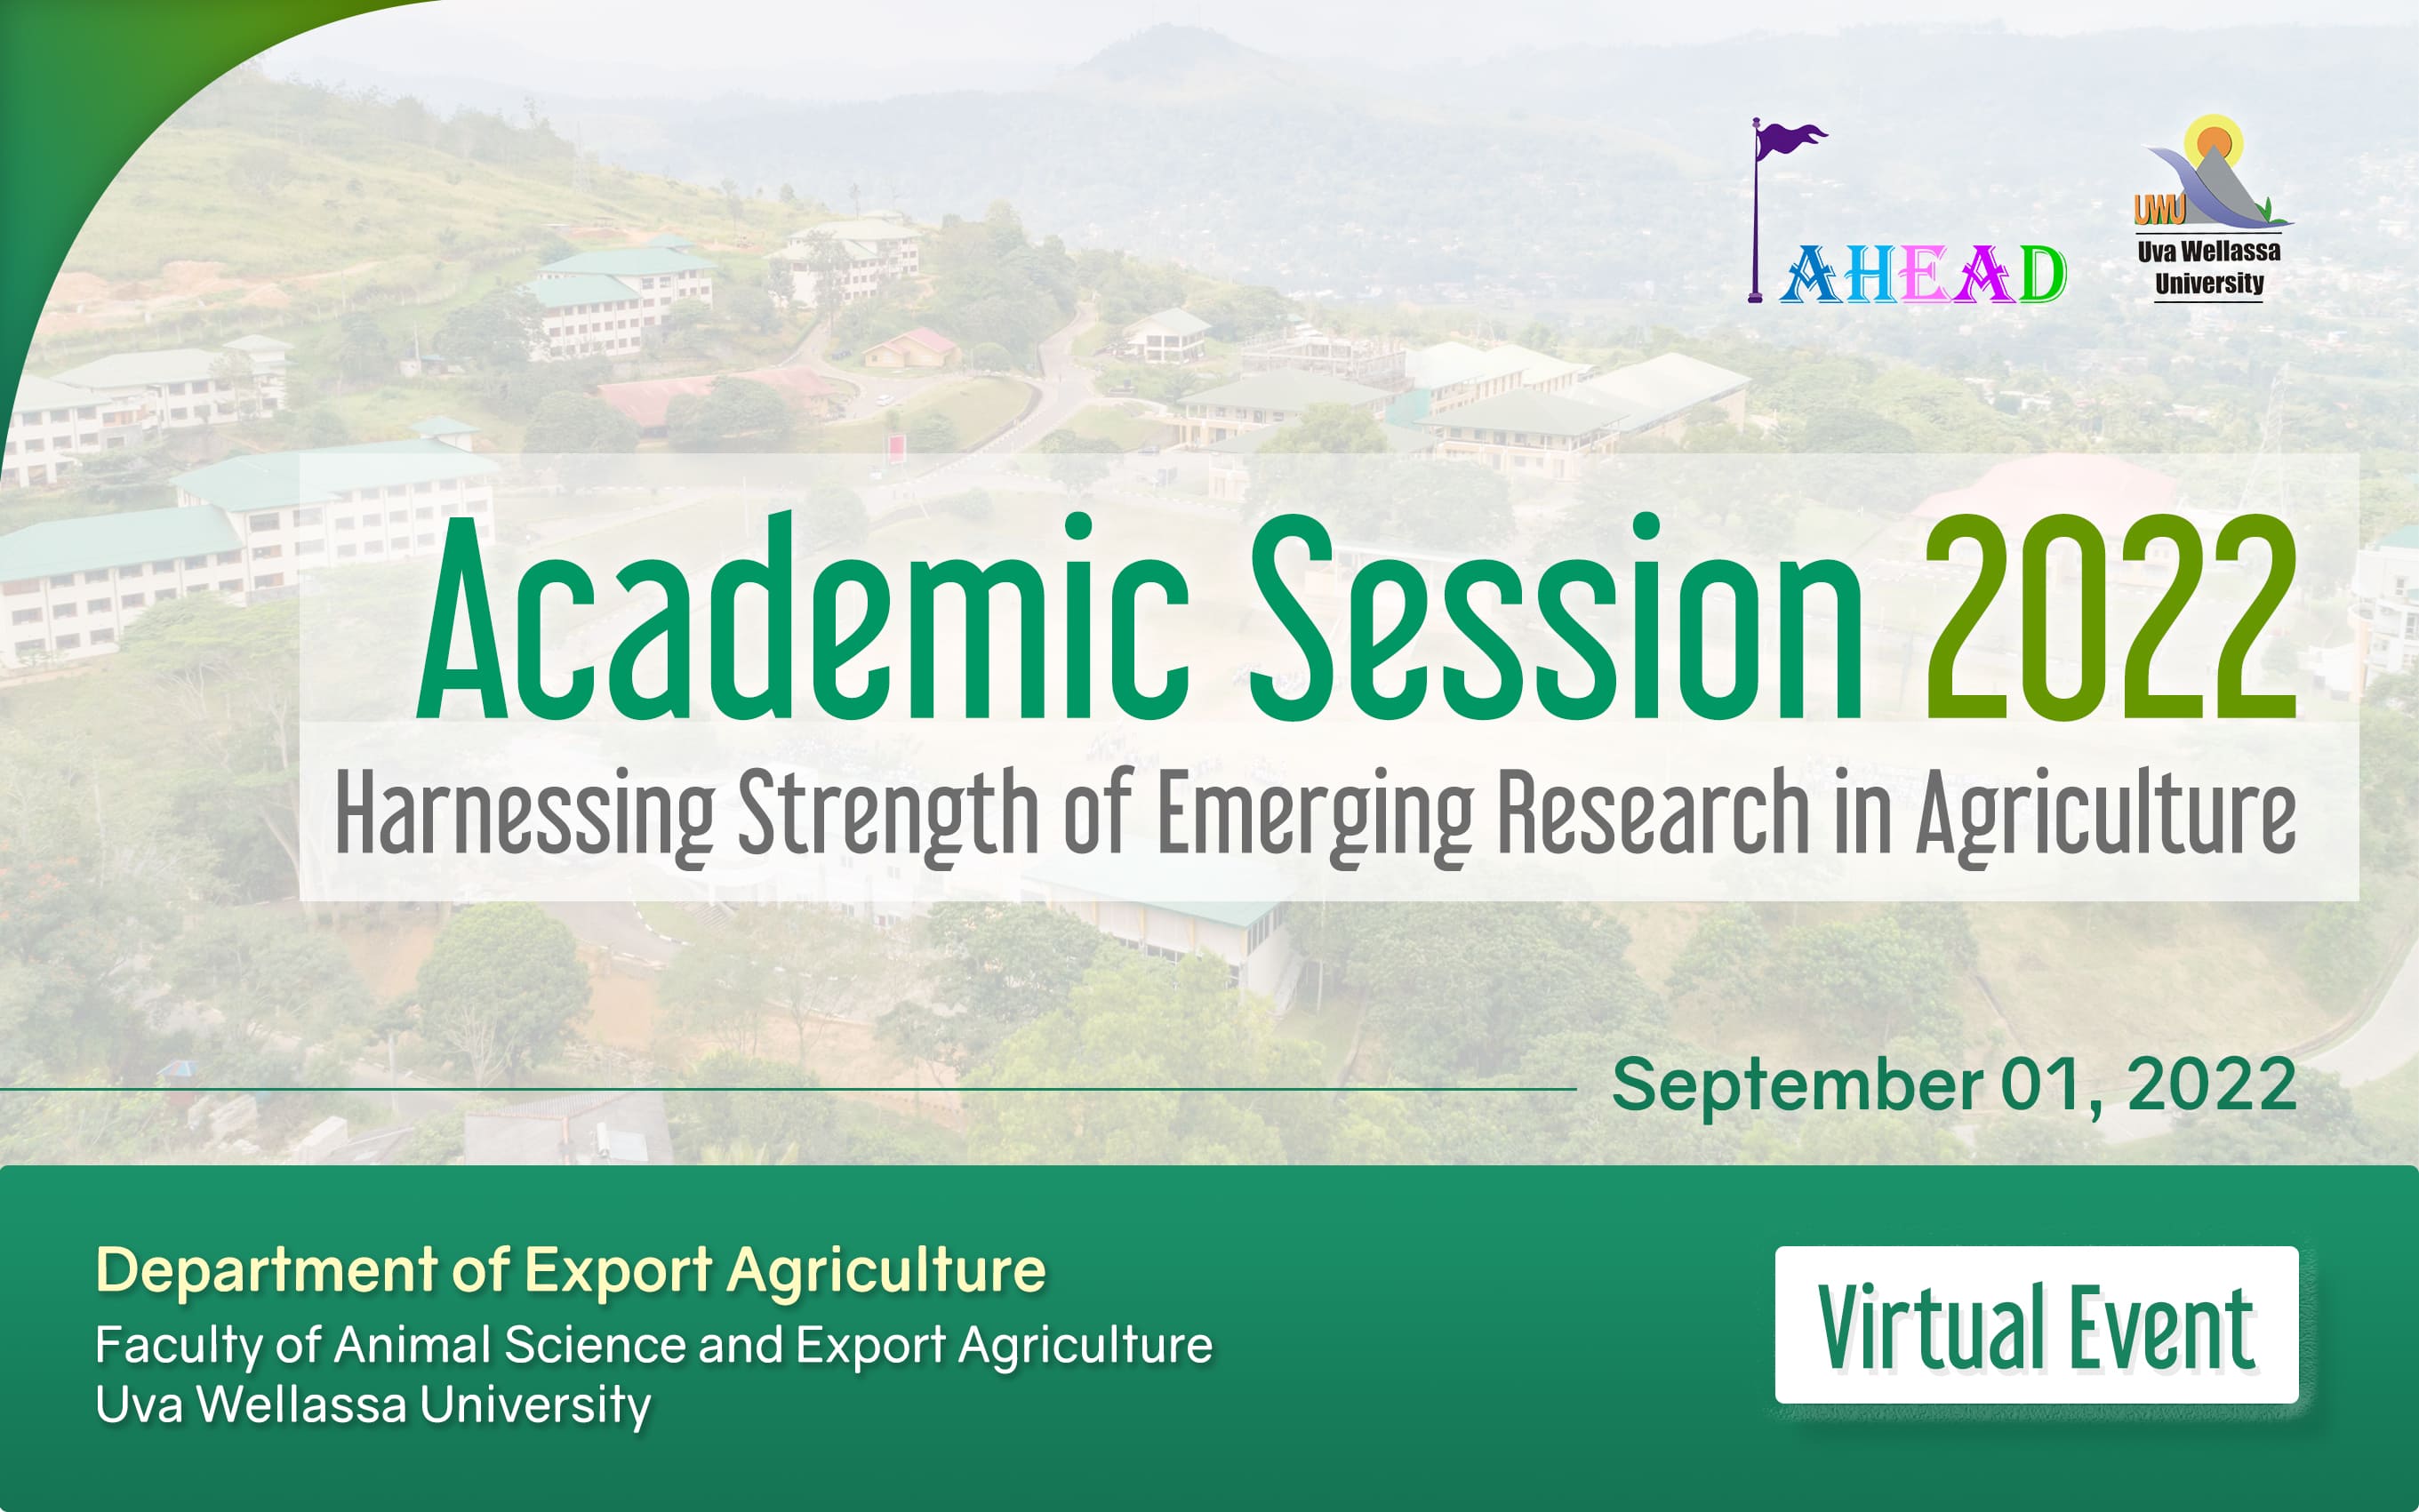 “Harnessing Strength of Emerging Research in Agriculture” – Academic Session 2022